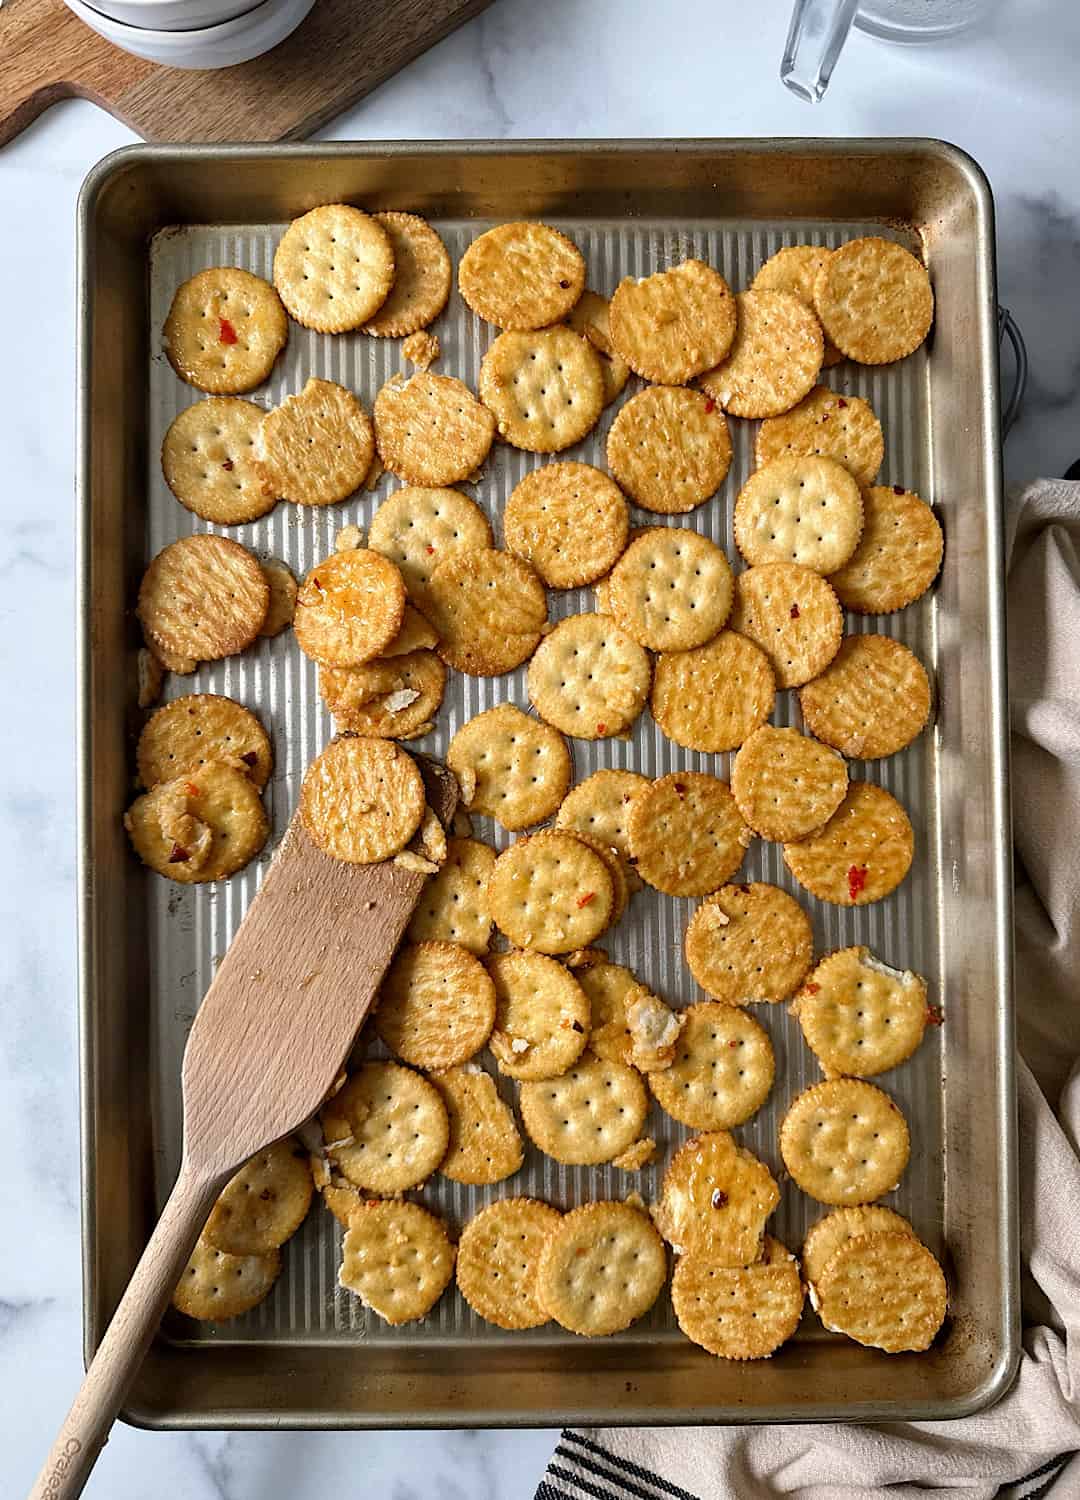 spicy sweet chili baked crackers on baking tray